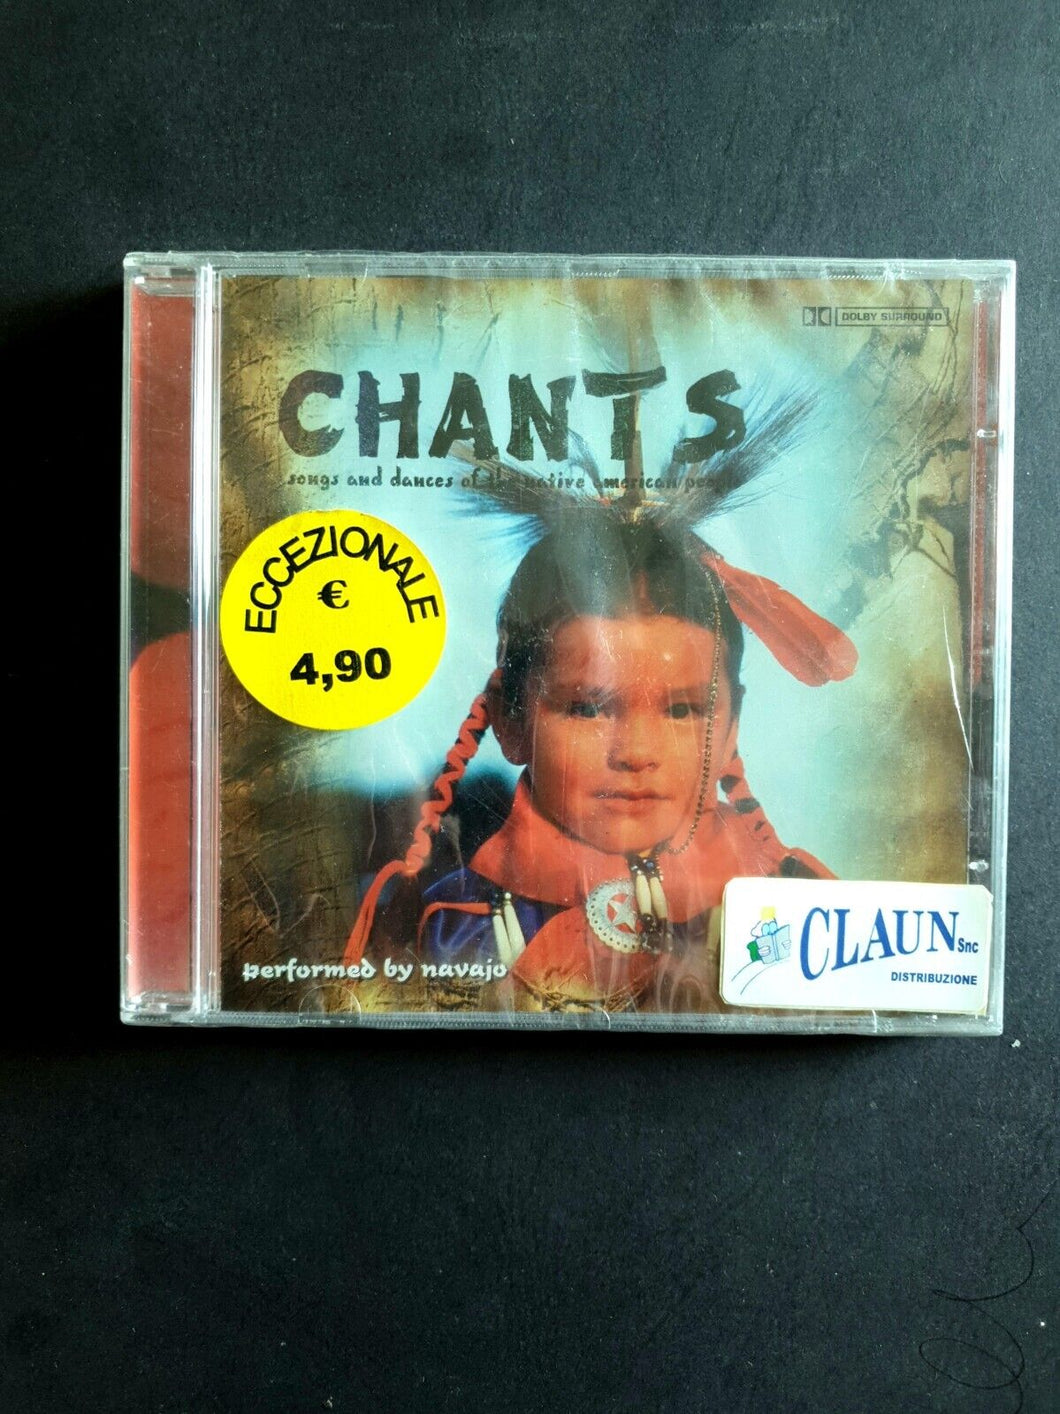 CHANTS Songs And Dances Of The Native American People CD Nuovo Sigillato.